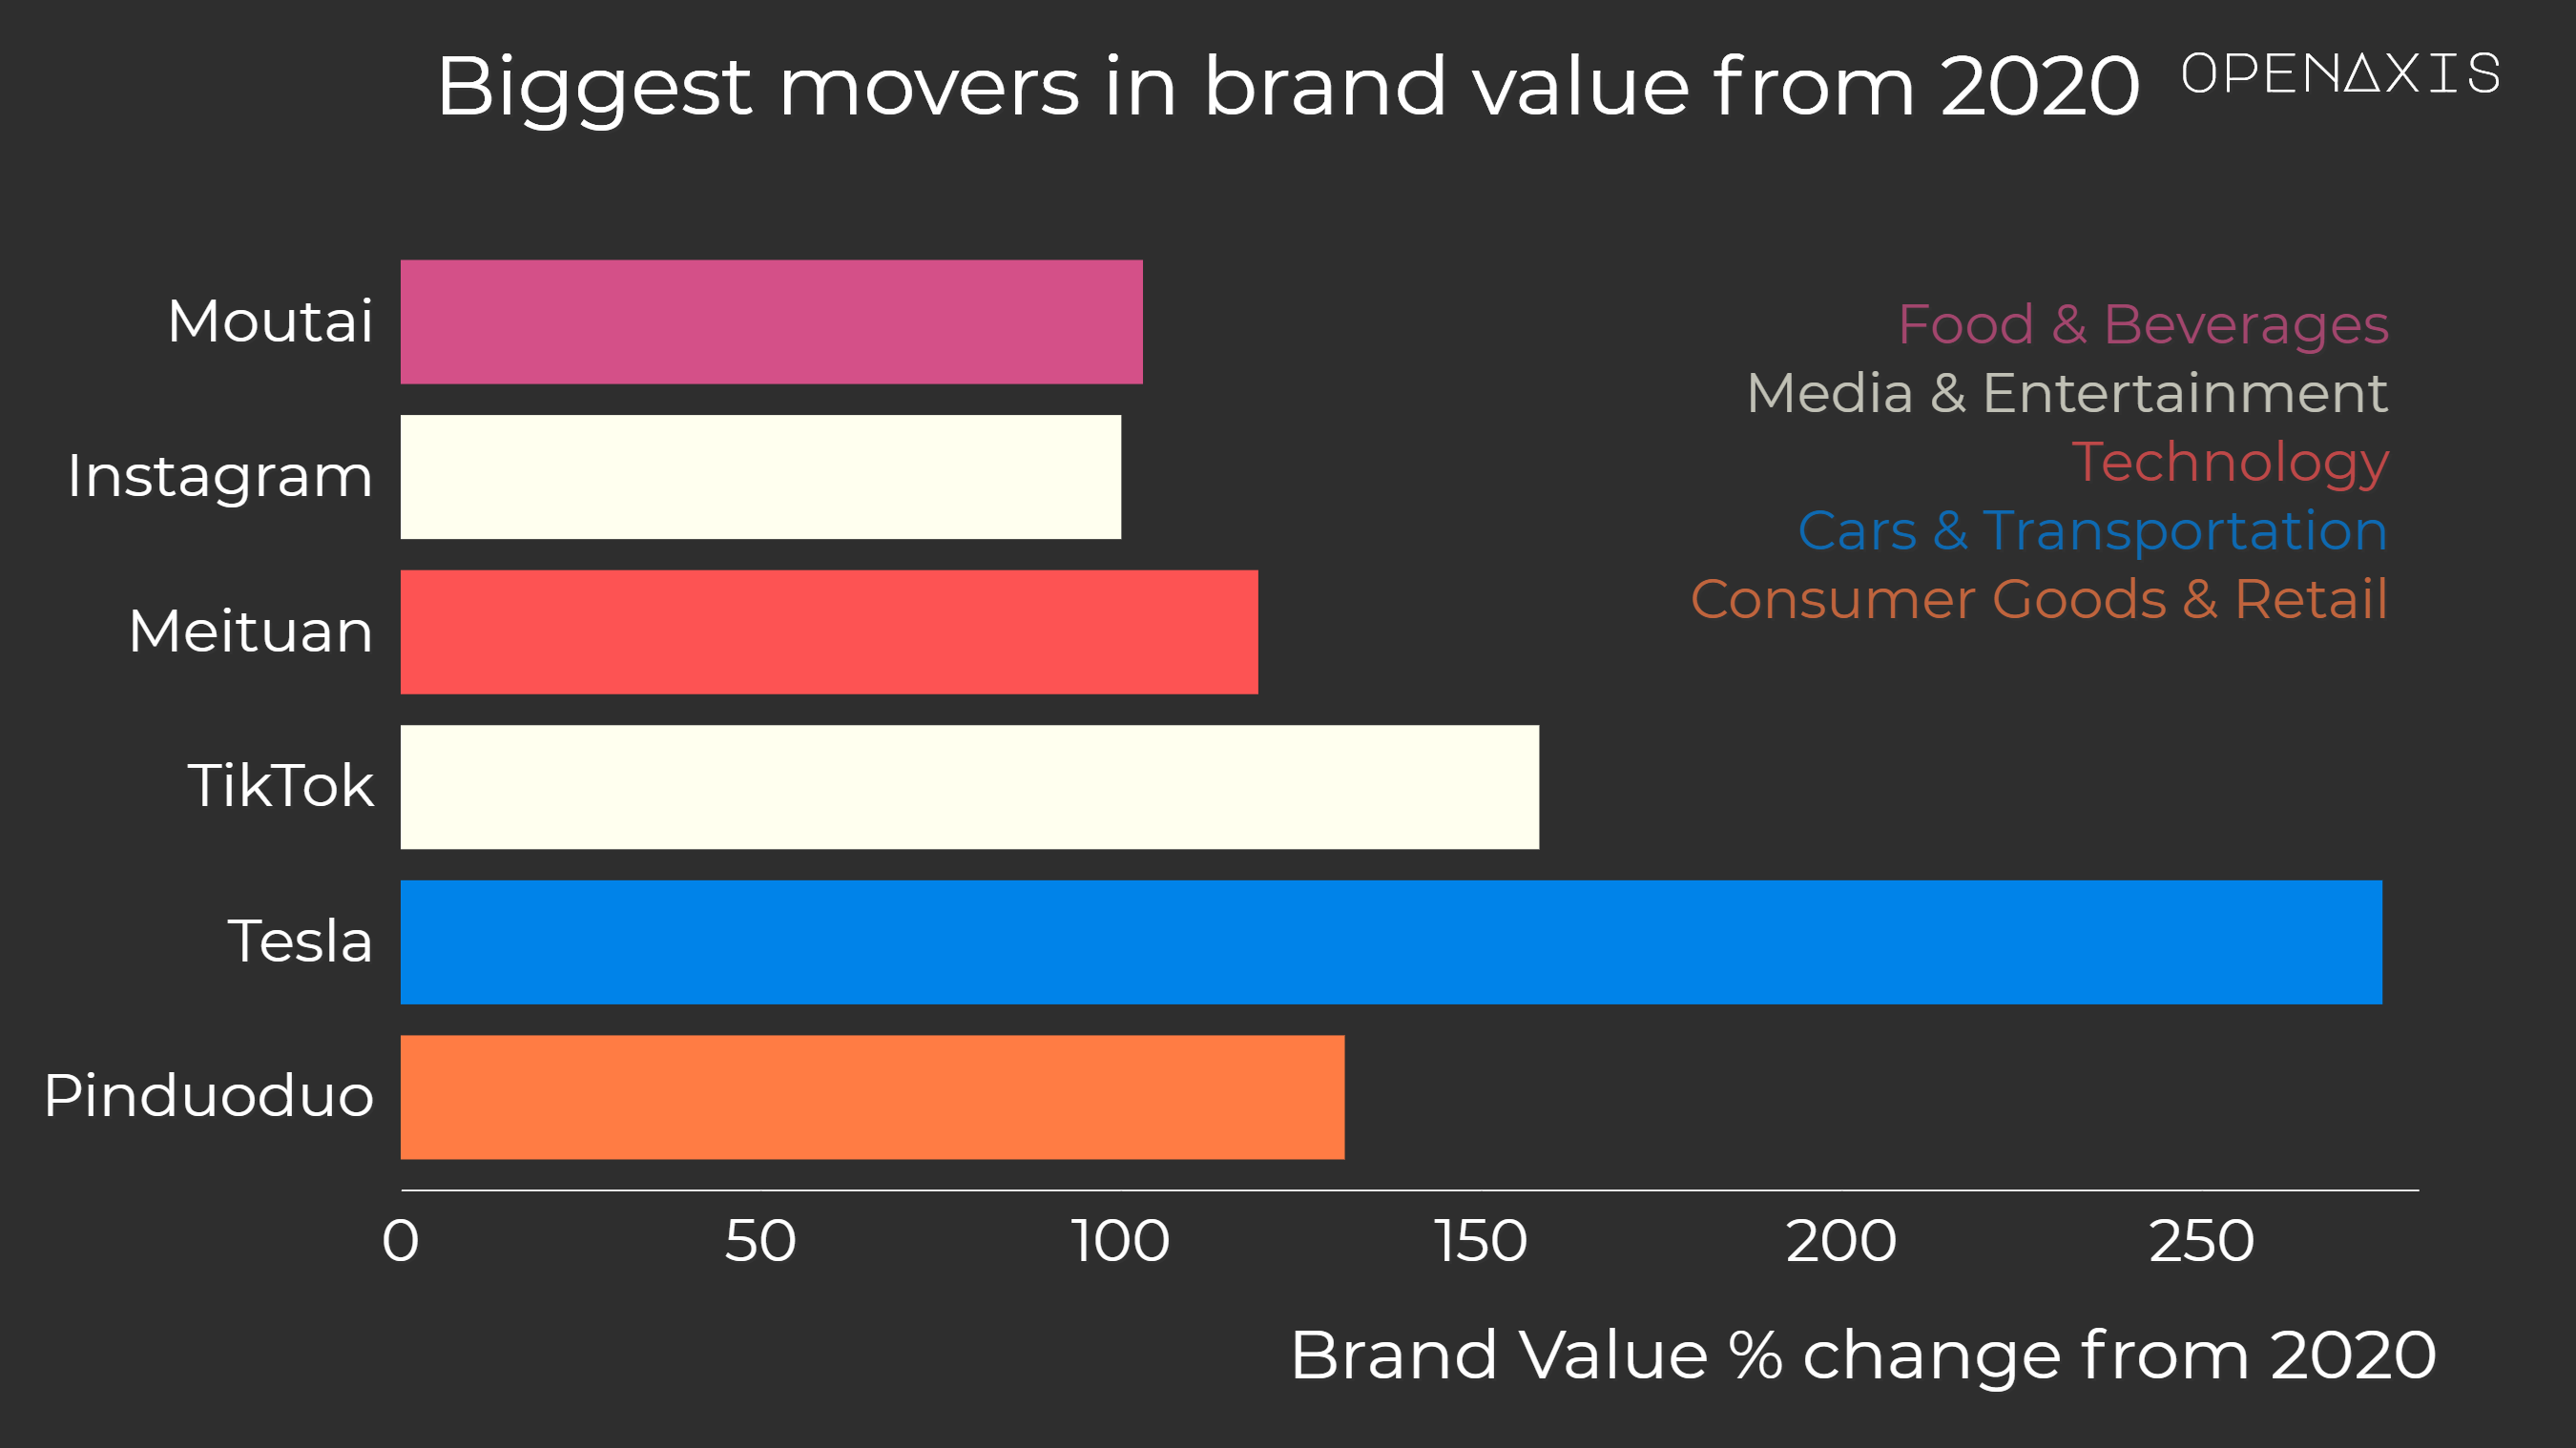 "Biggest movers in brand value from 2020"